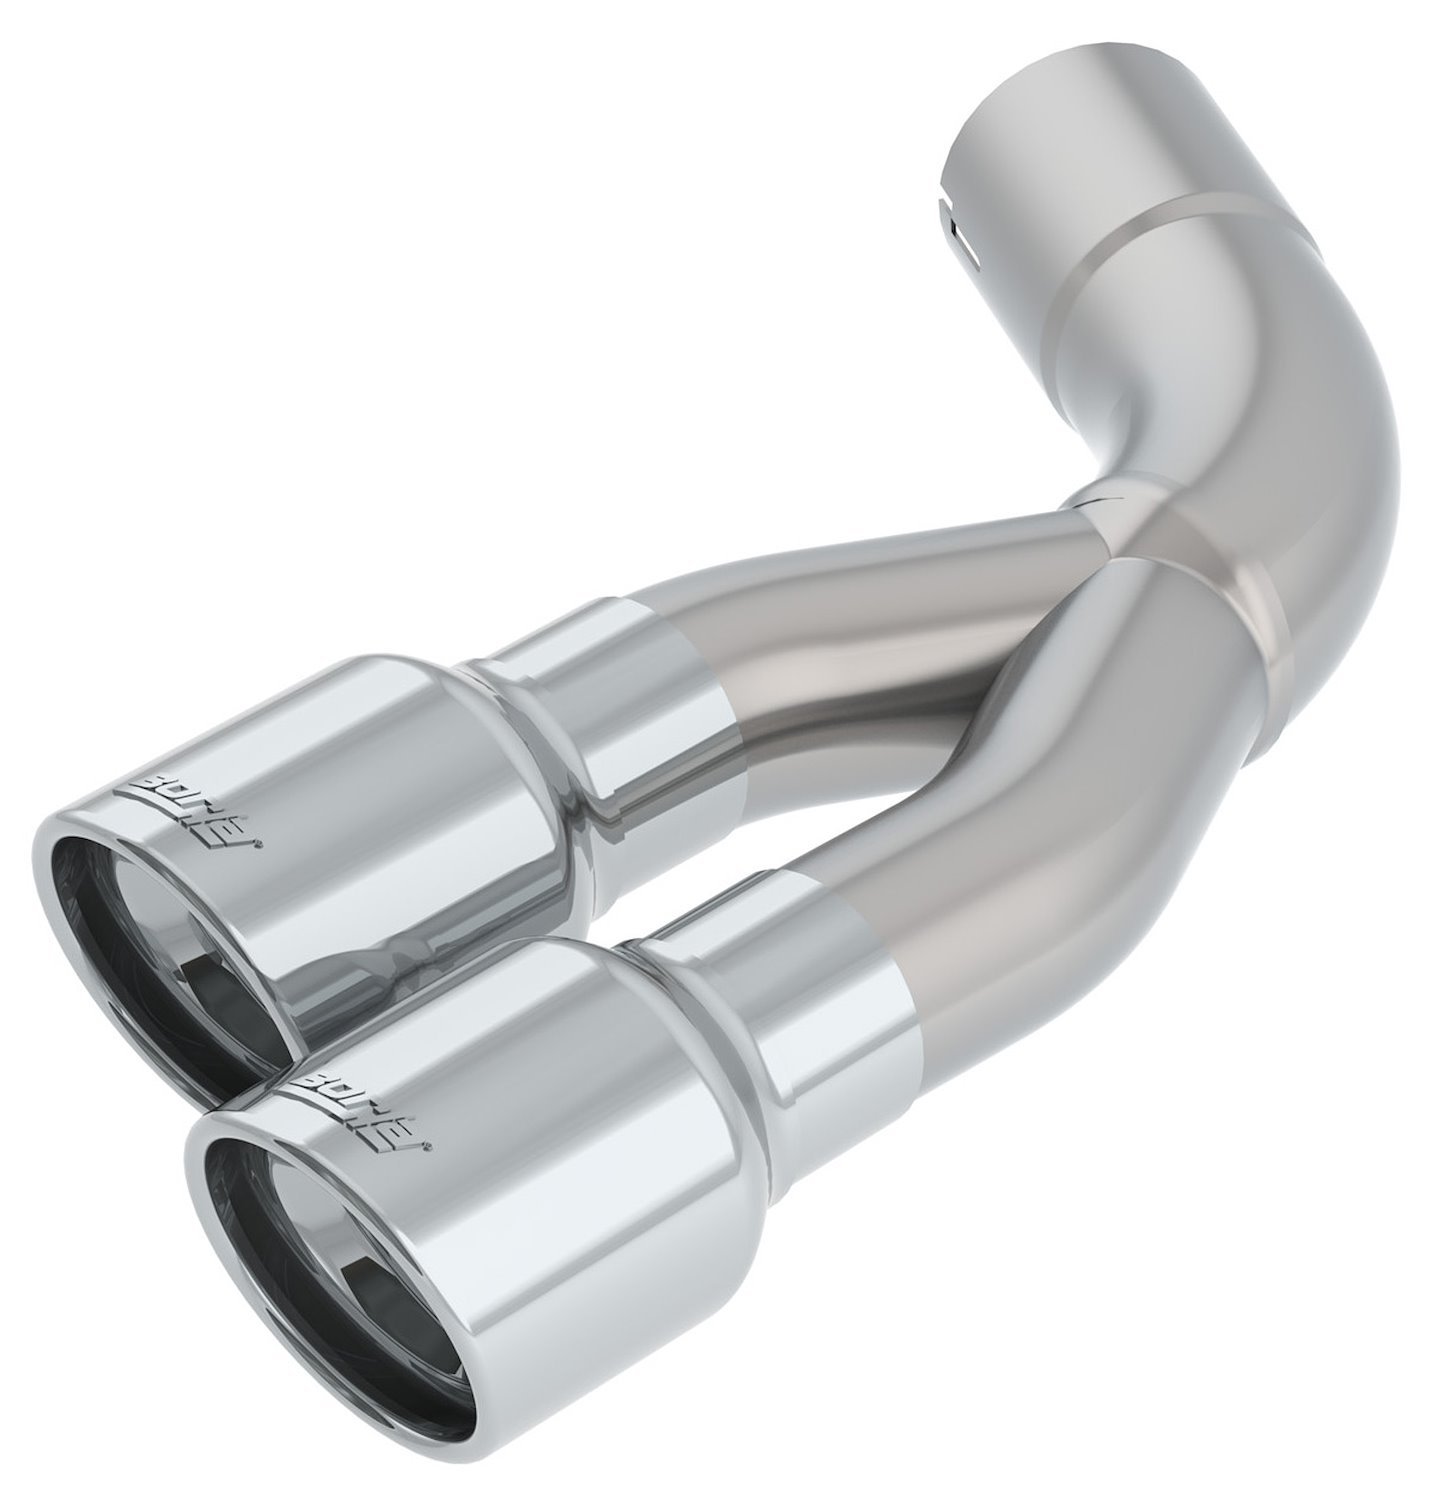 Dual Round Stainless Steel Exhaust Tip 3-1/2 in. D x 6 in. L - Polished Finish